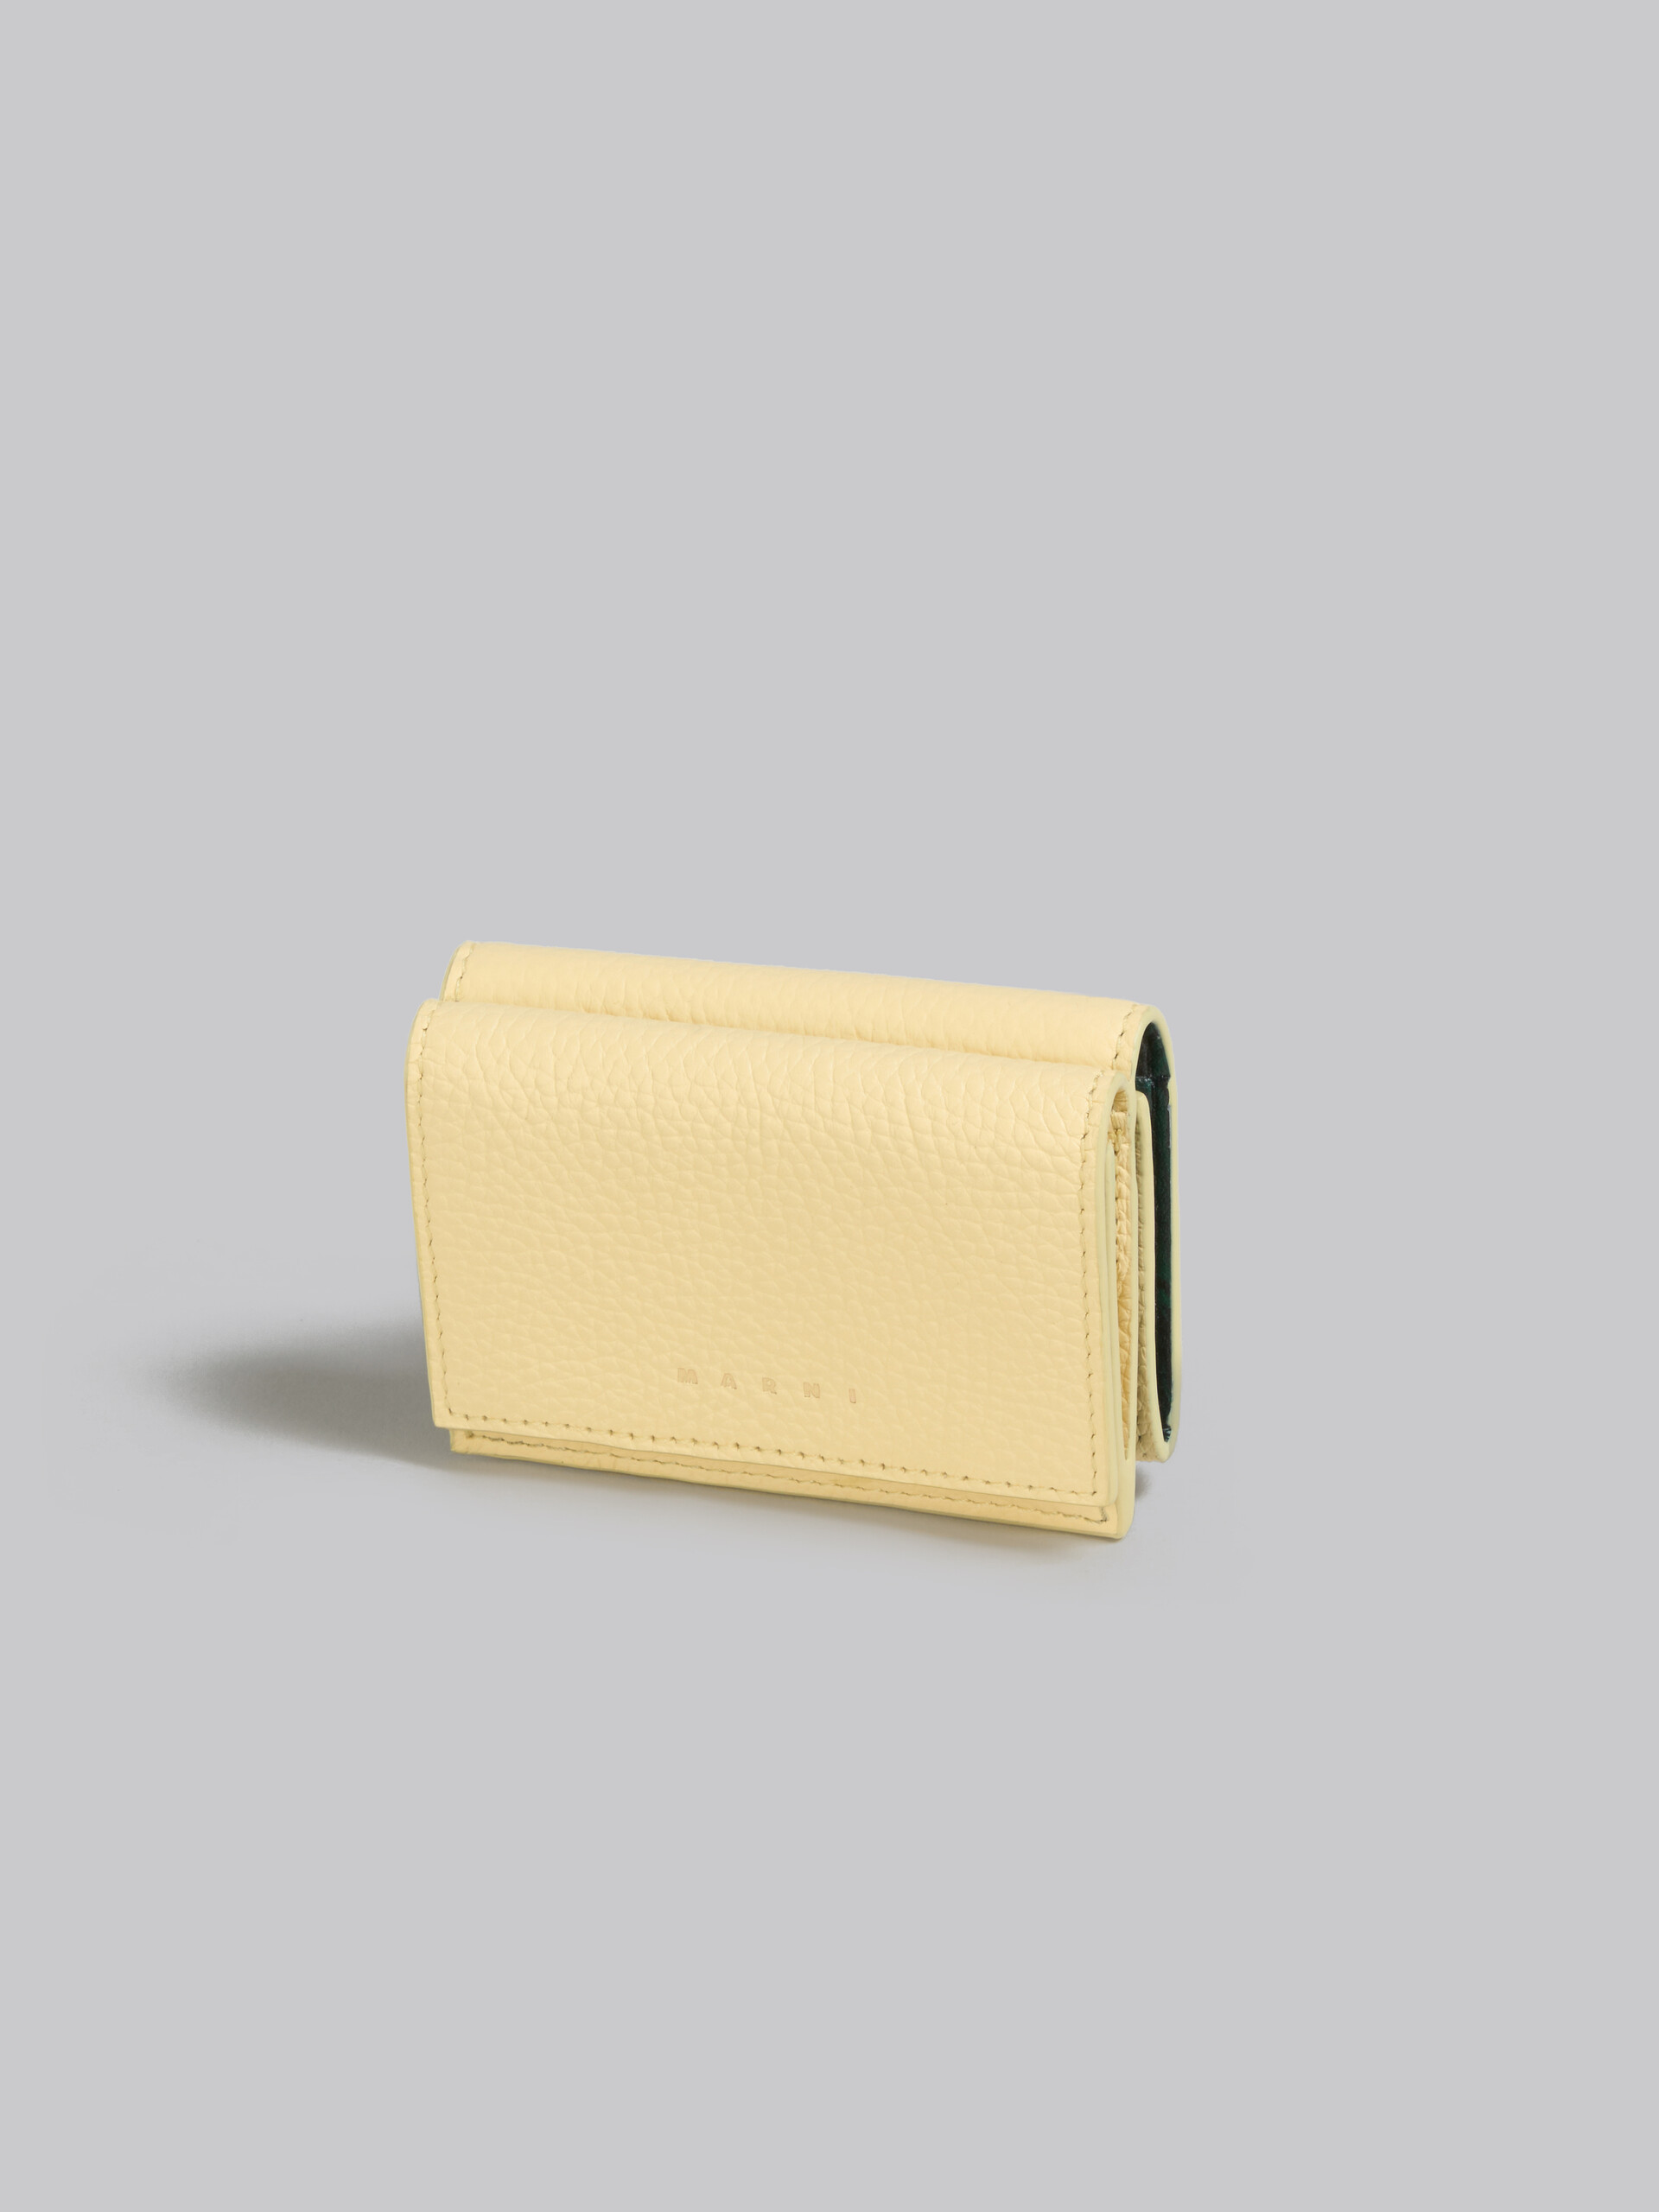 Light yellow leather trifold Venice wallet with marbled interior